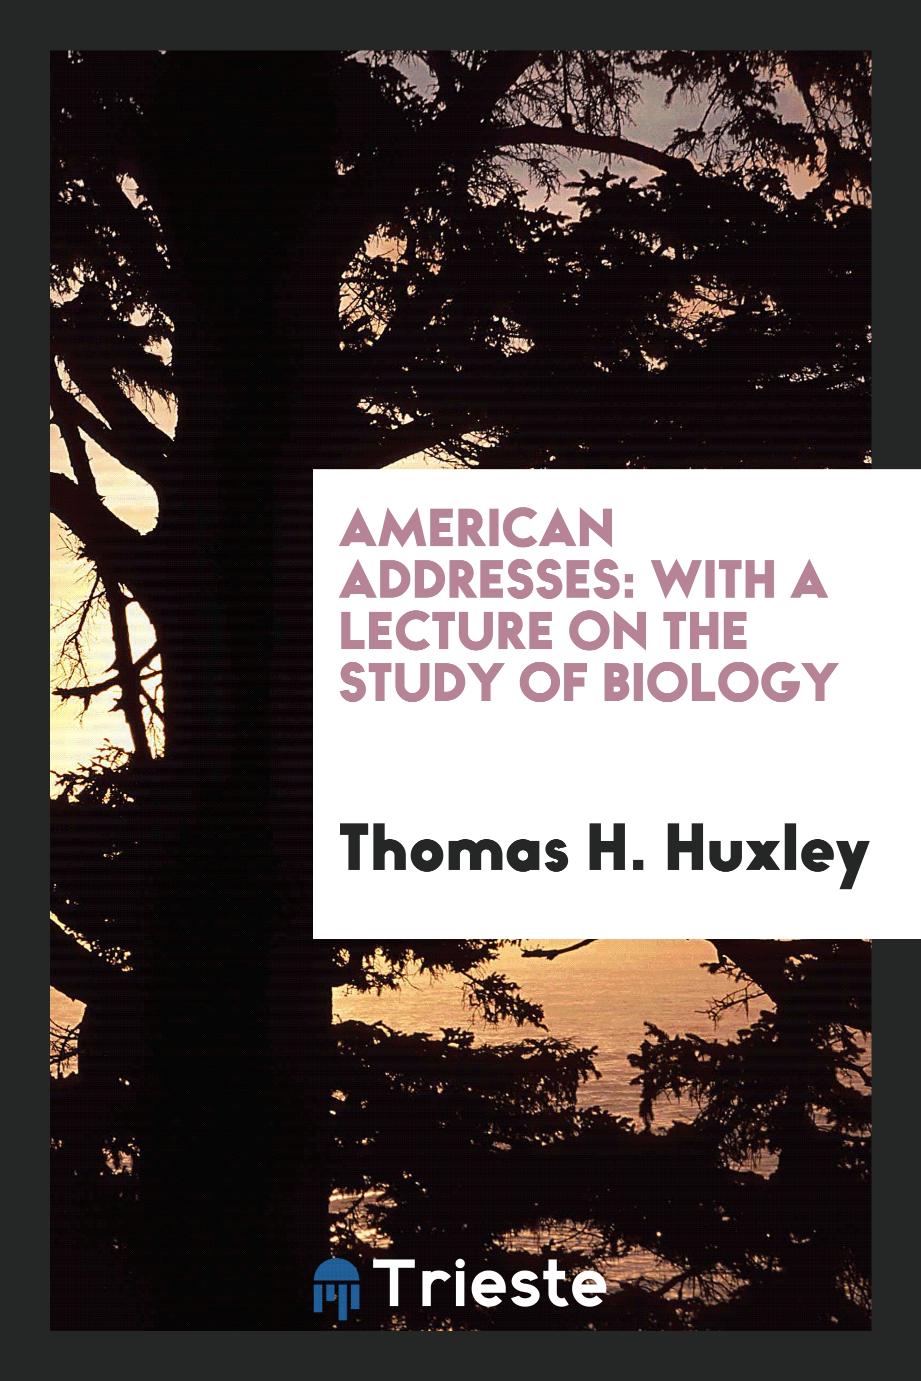 American addresses: with a lecture on the study of biology